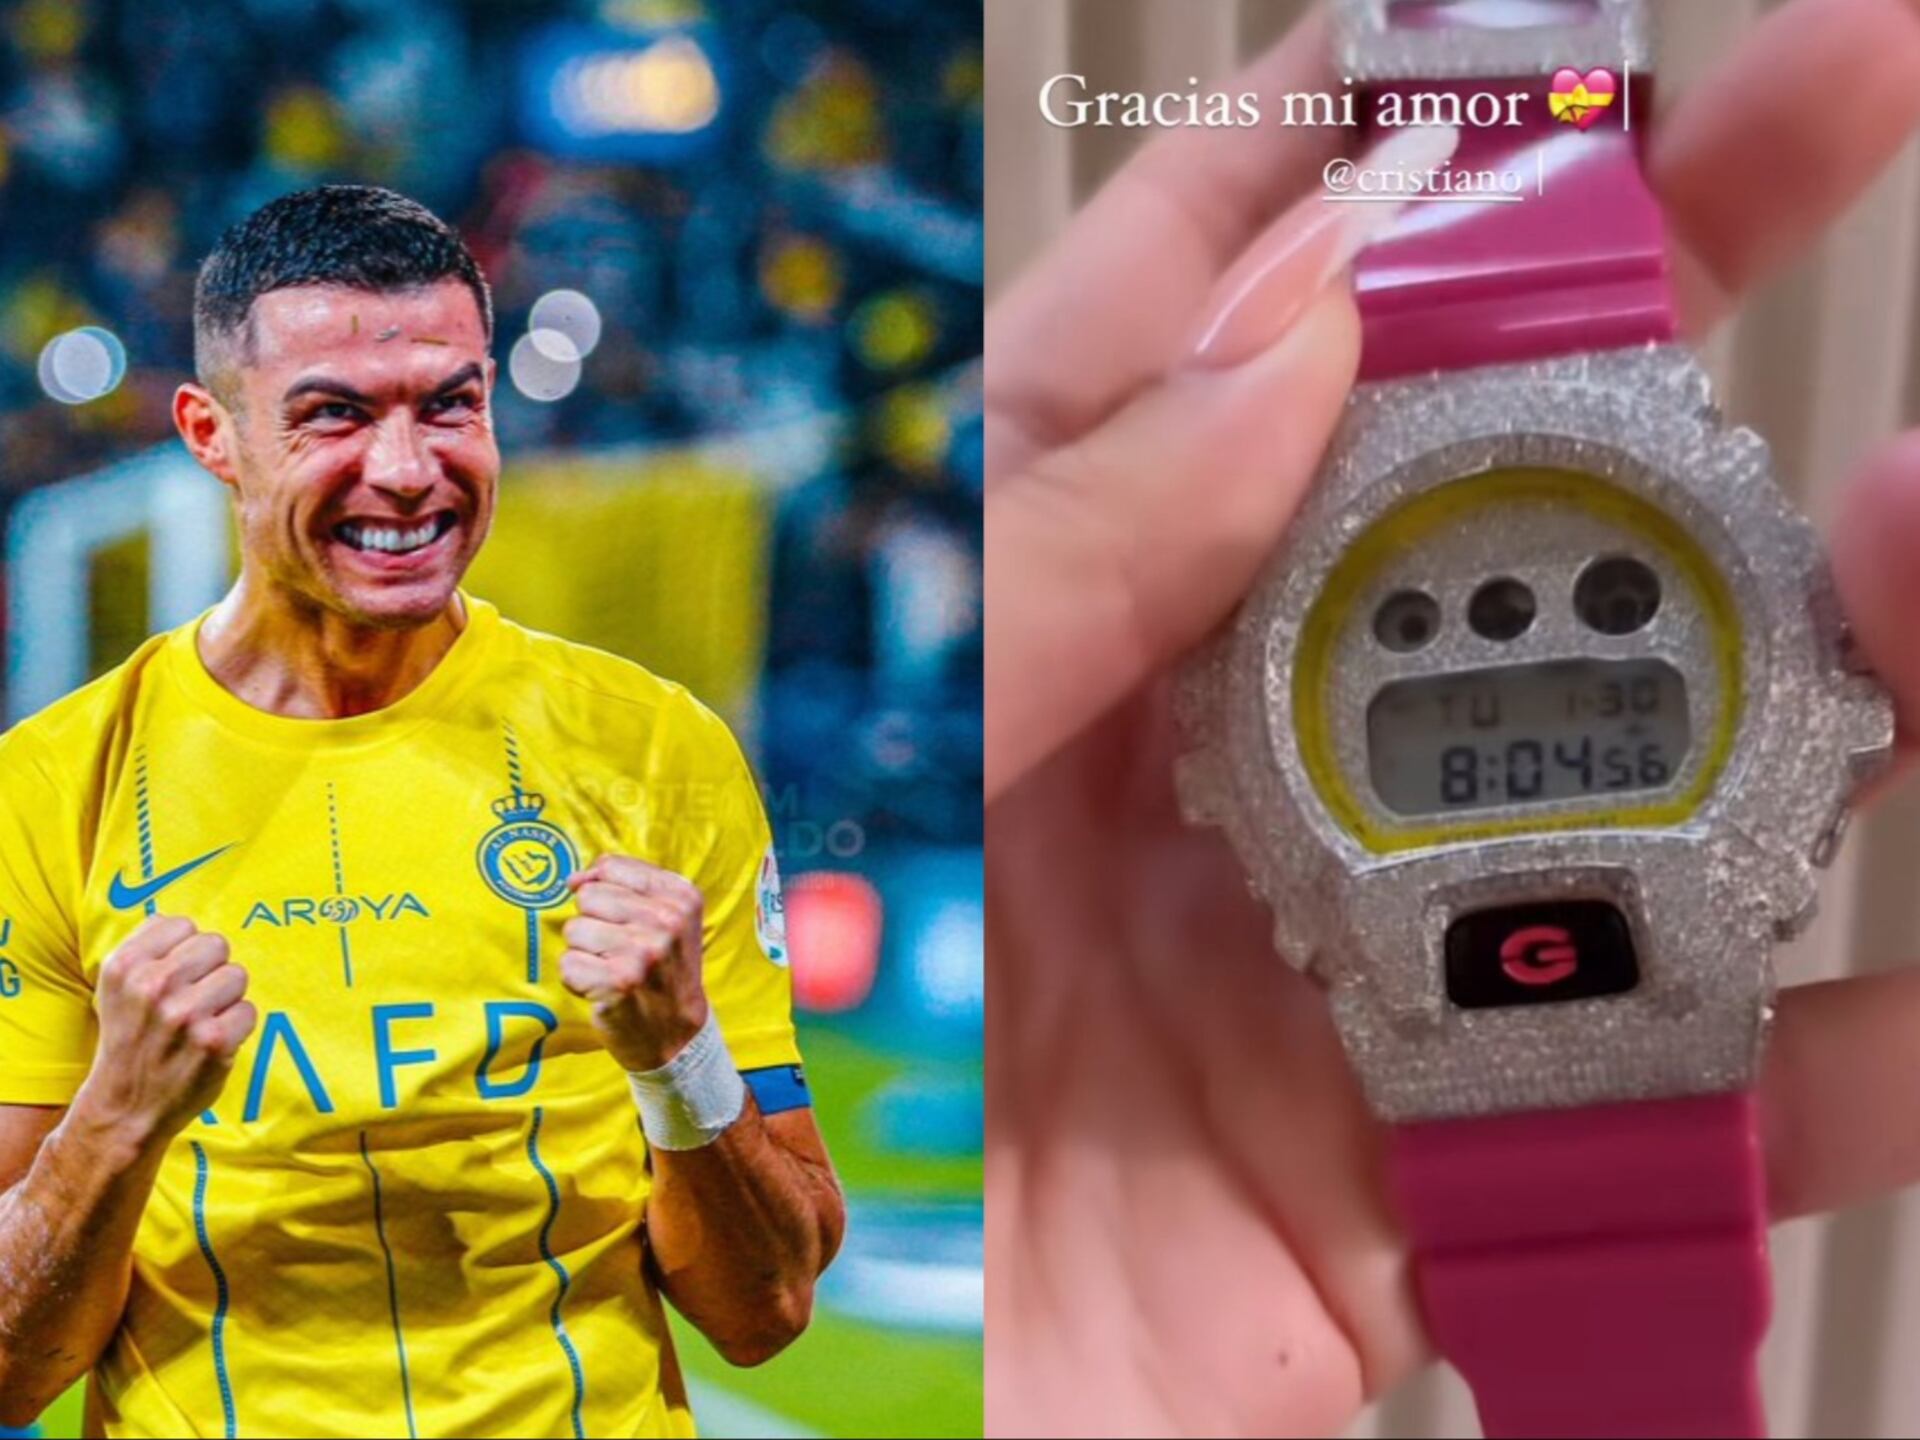 Cristiano gifts Georgina Rodriguez a watch worth over $100k for her birthday